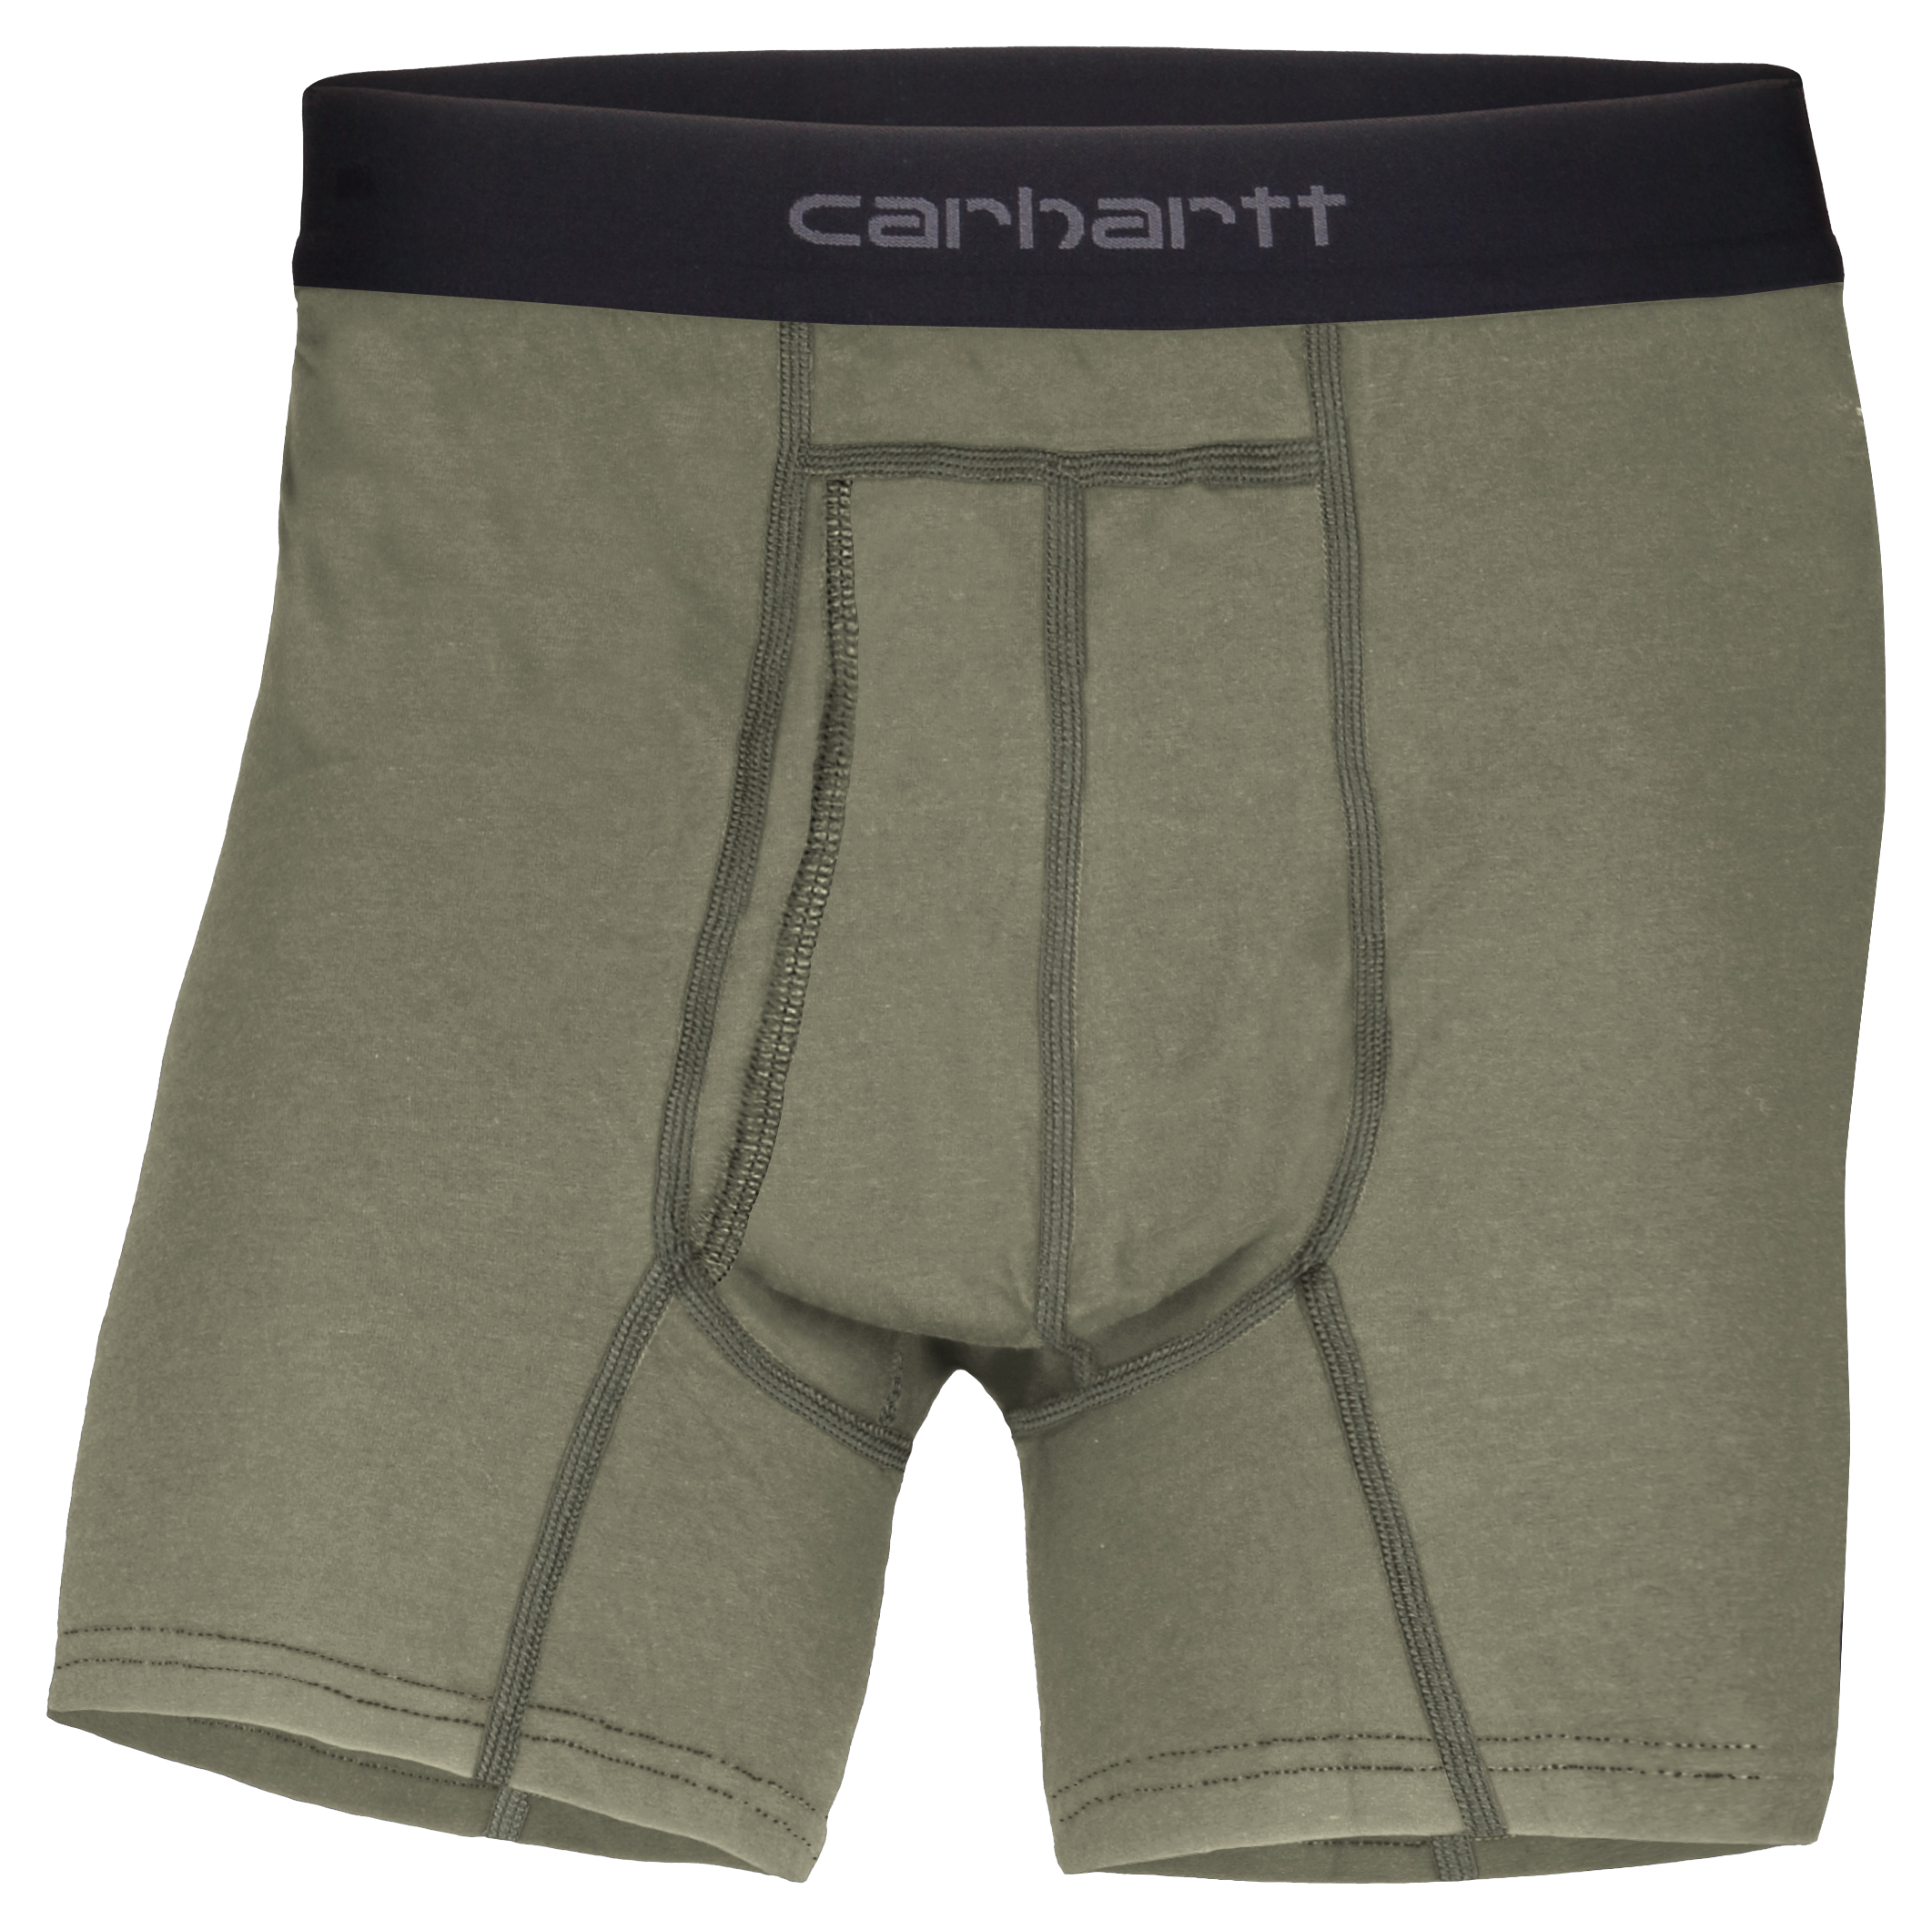 Carhartt Men's 8 Inch Basic Cotton-Poly Boxer Brief 2 Pack